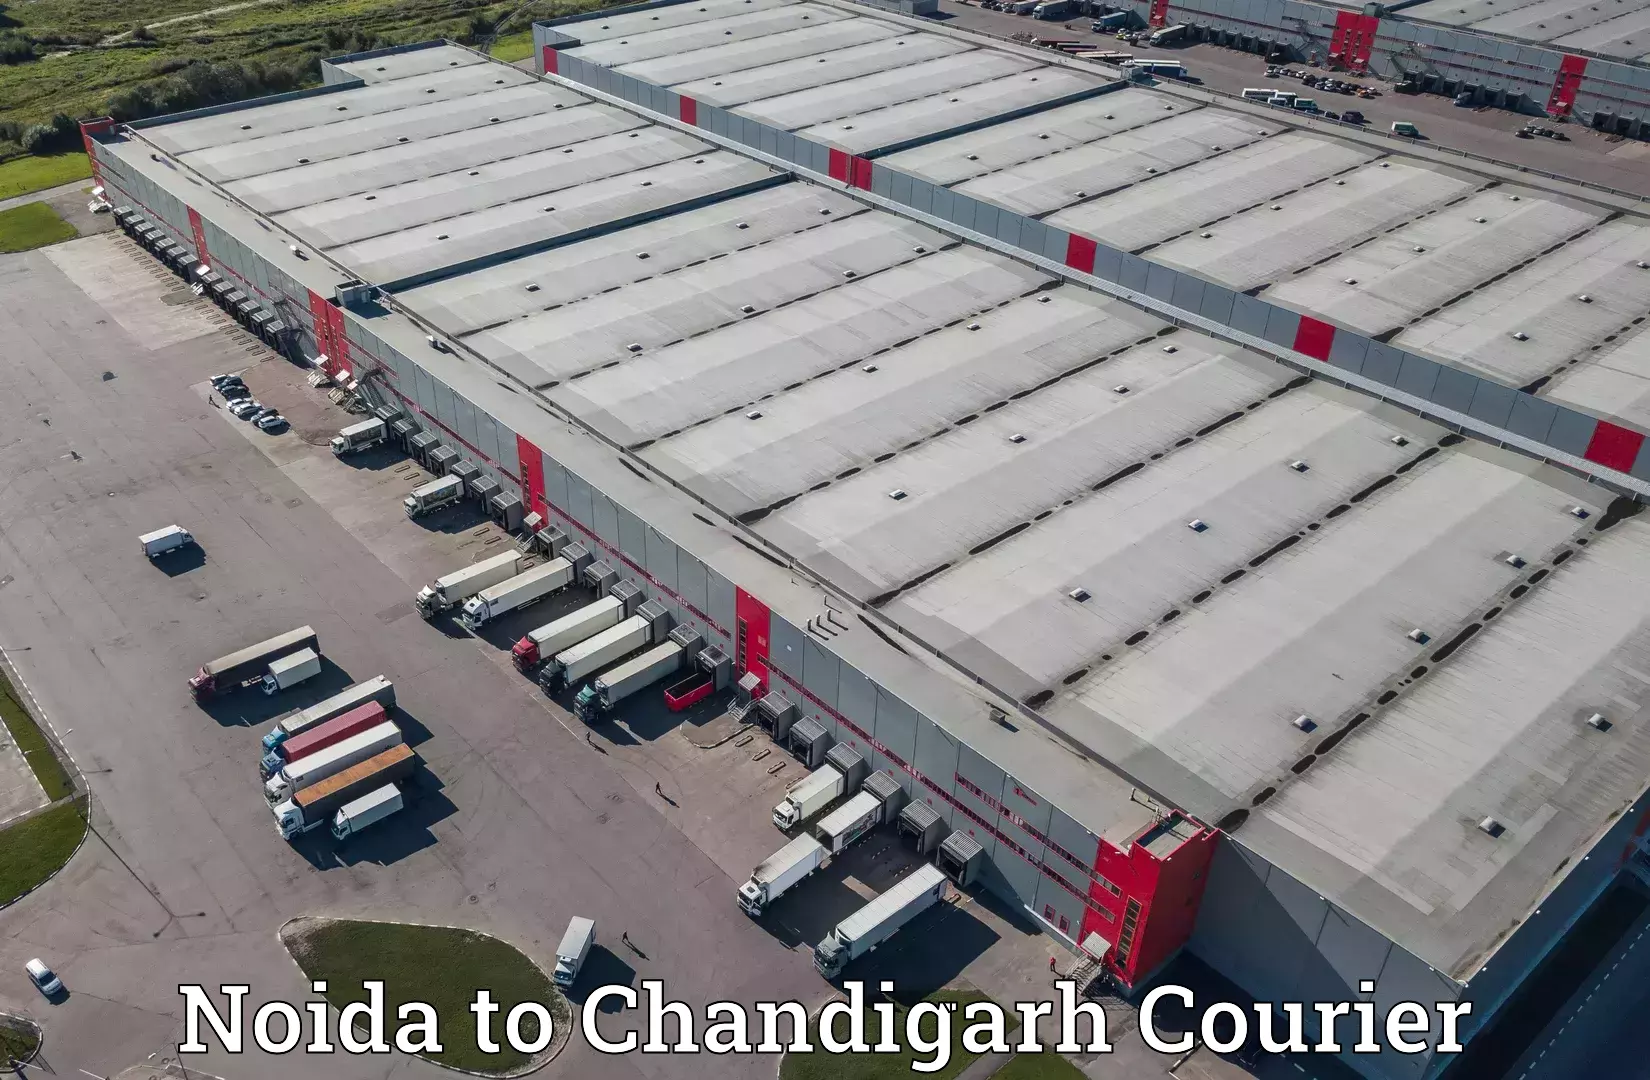 Express delivery network Noida to Chandigarh